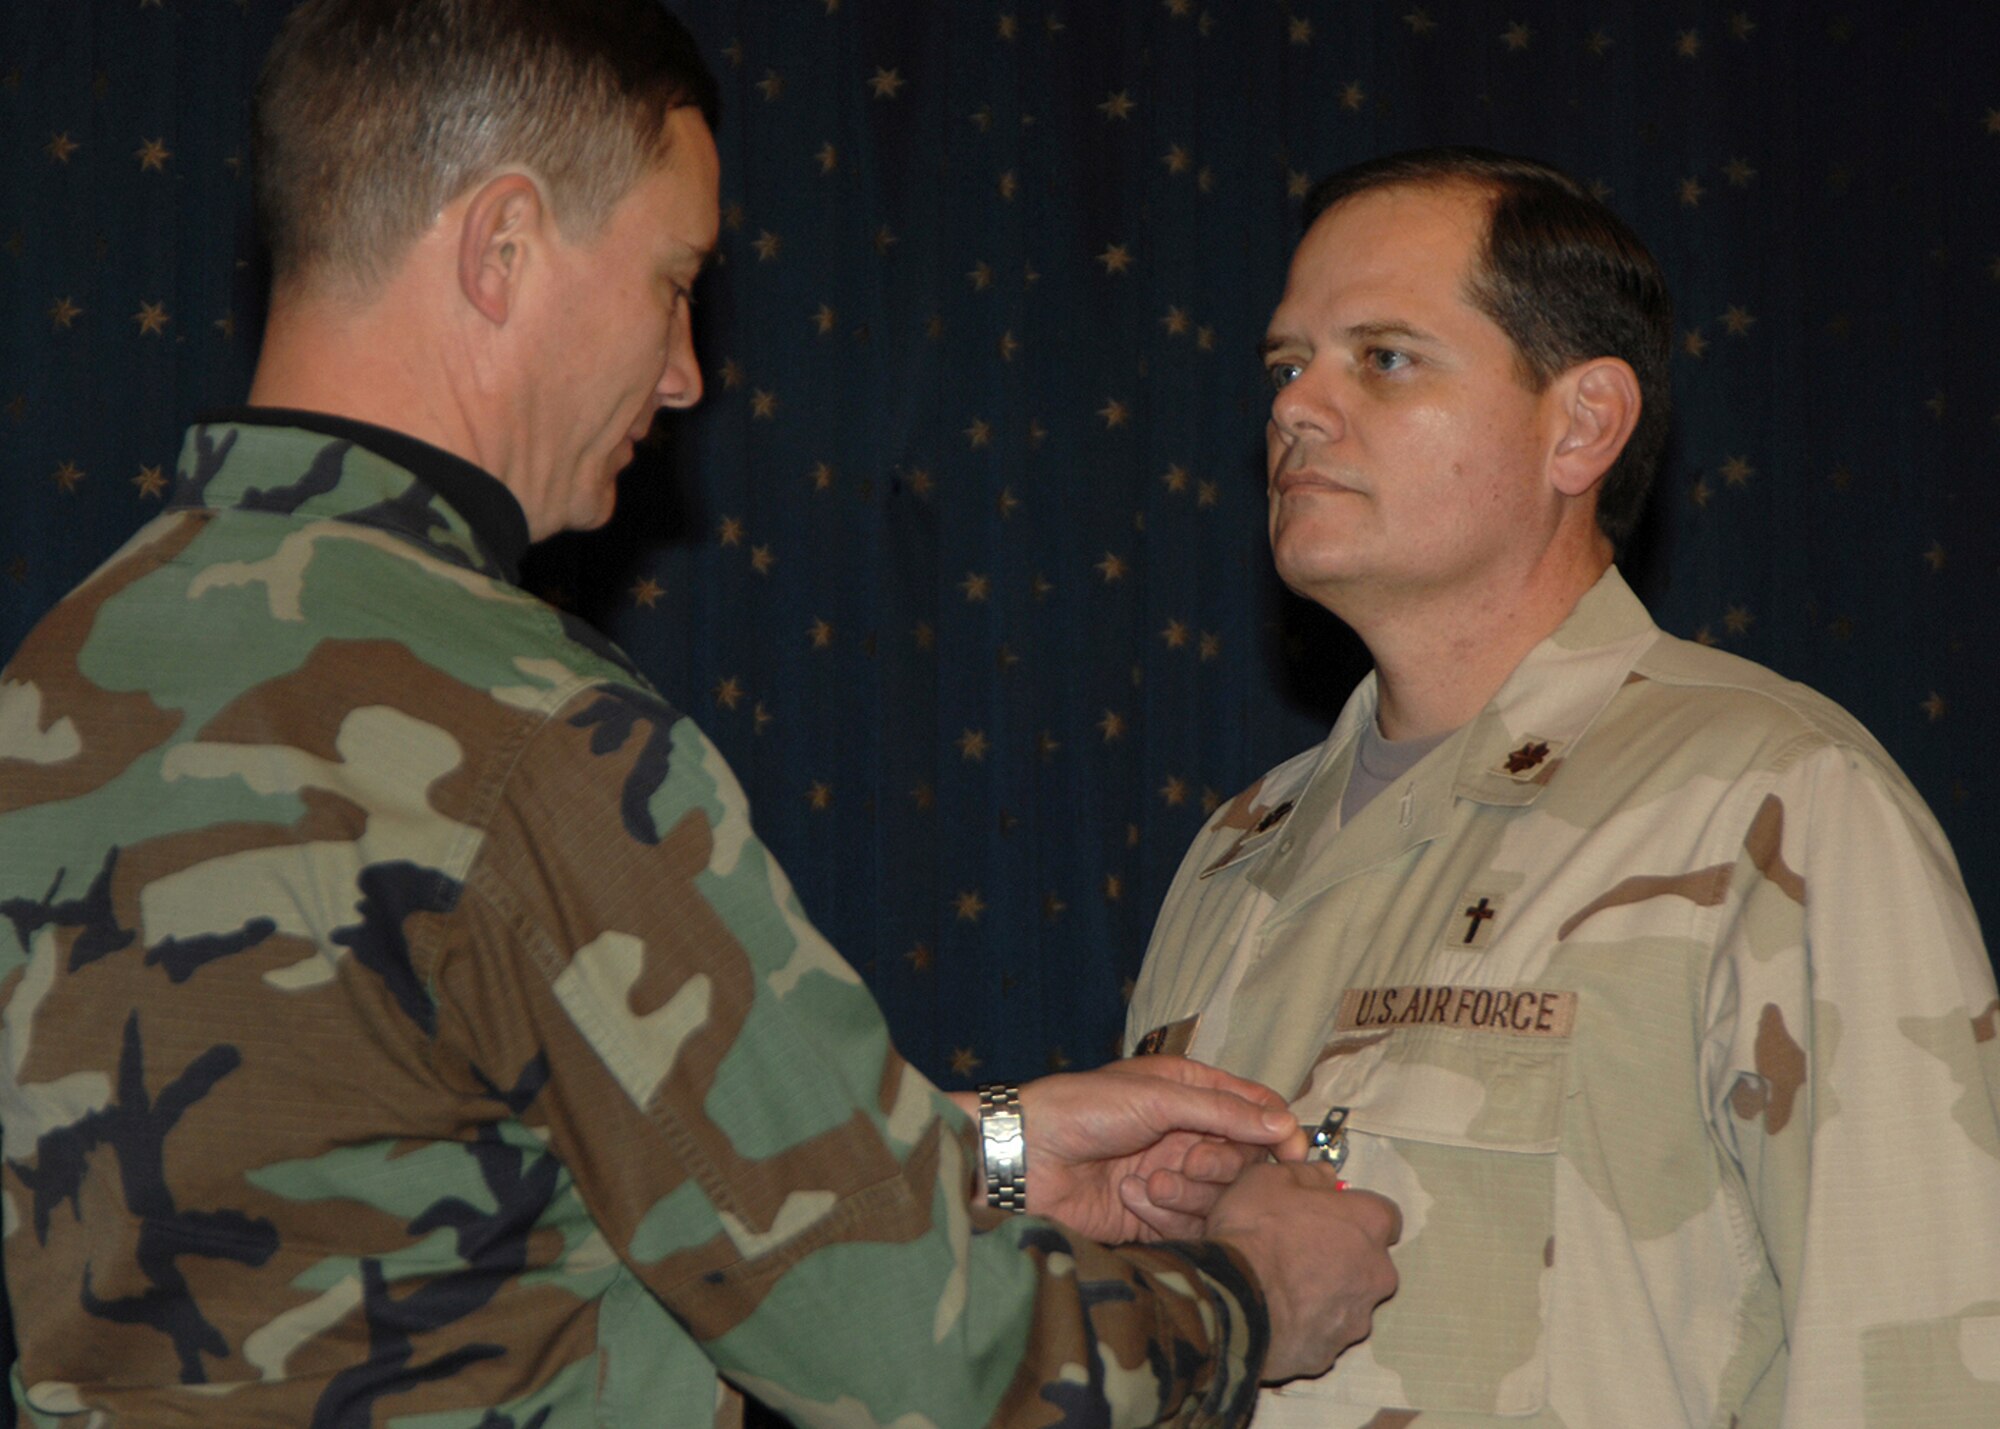 KIRTLAND AIR FORCE BASE, N.M. -- Chap. (Maj.) Thomas Porter, a chaplain with the 377th Air Base Wing, receives a Bronze Star from Col. Robert E. Suminsby, 377th Air Base Wing commander, from his actions while he was deployed in Iraq. While deployed, the chaplain handled the spiritual needs of the servicemembers he was with and worked with the children in the community. (U.S. Air Force photo by Adam Wooten)